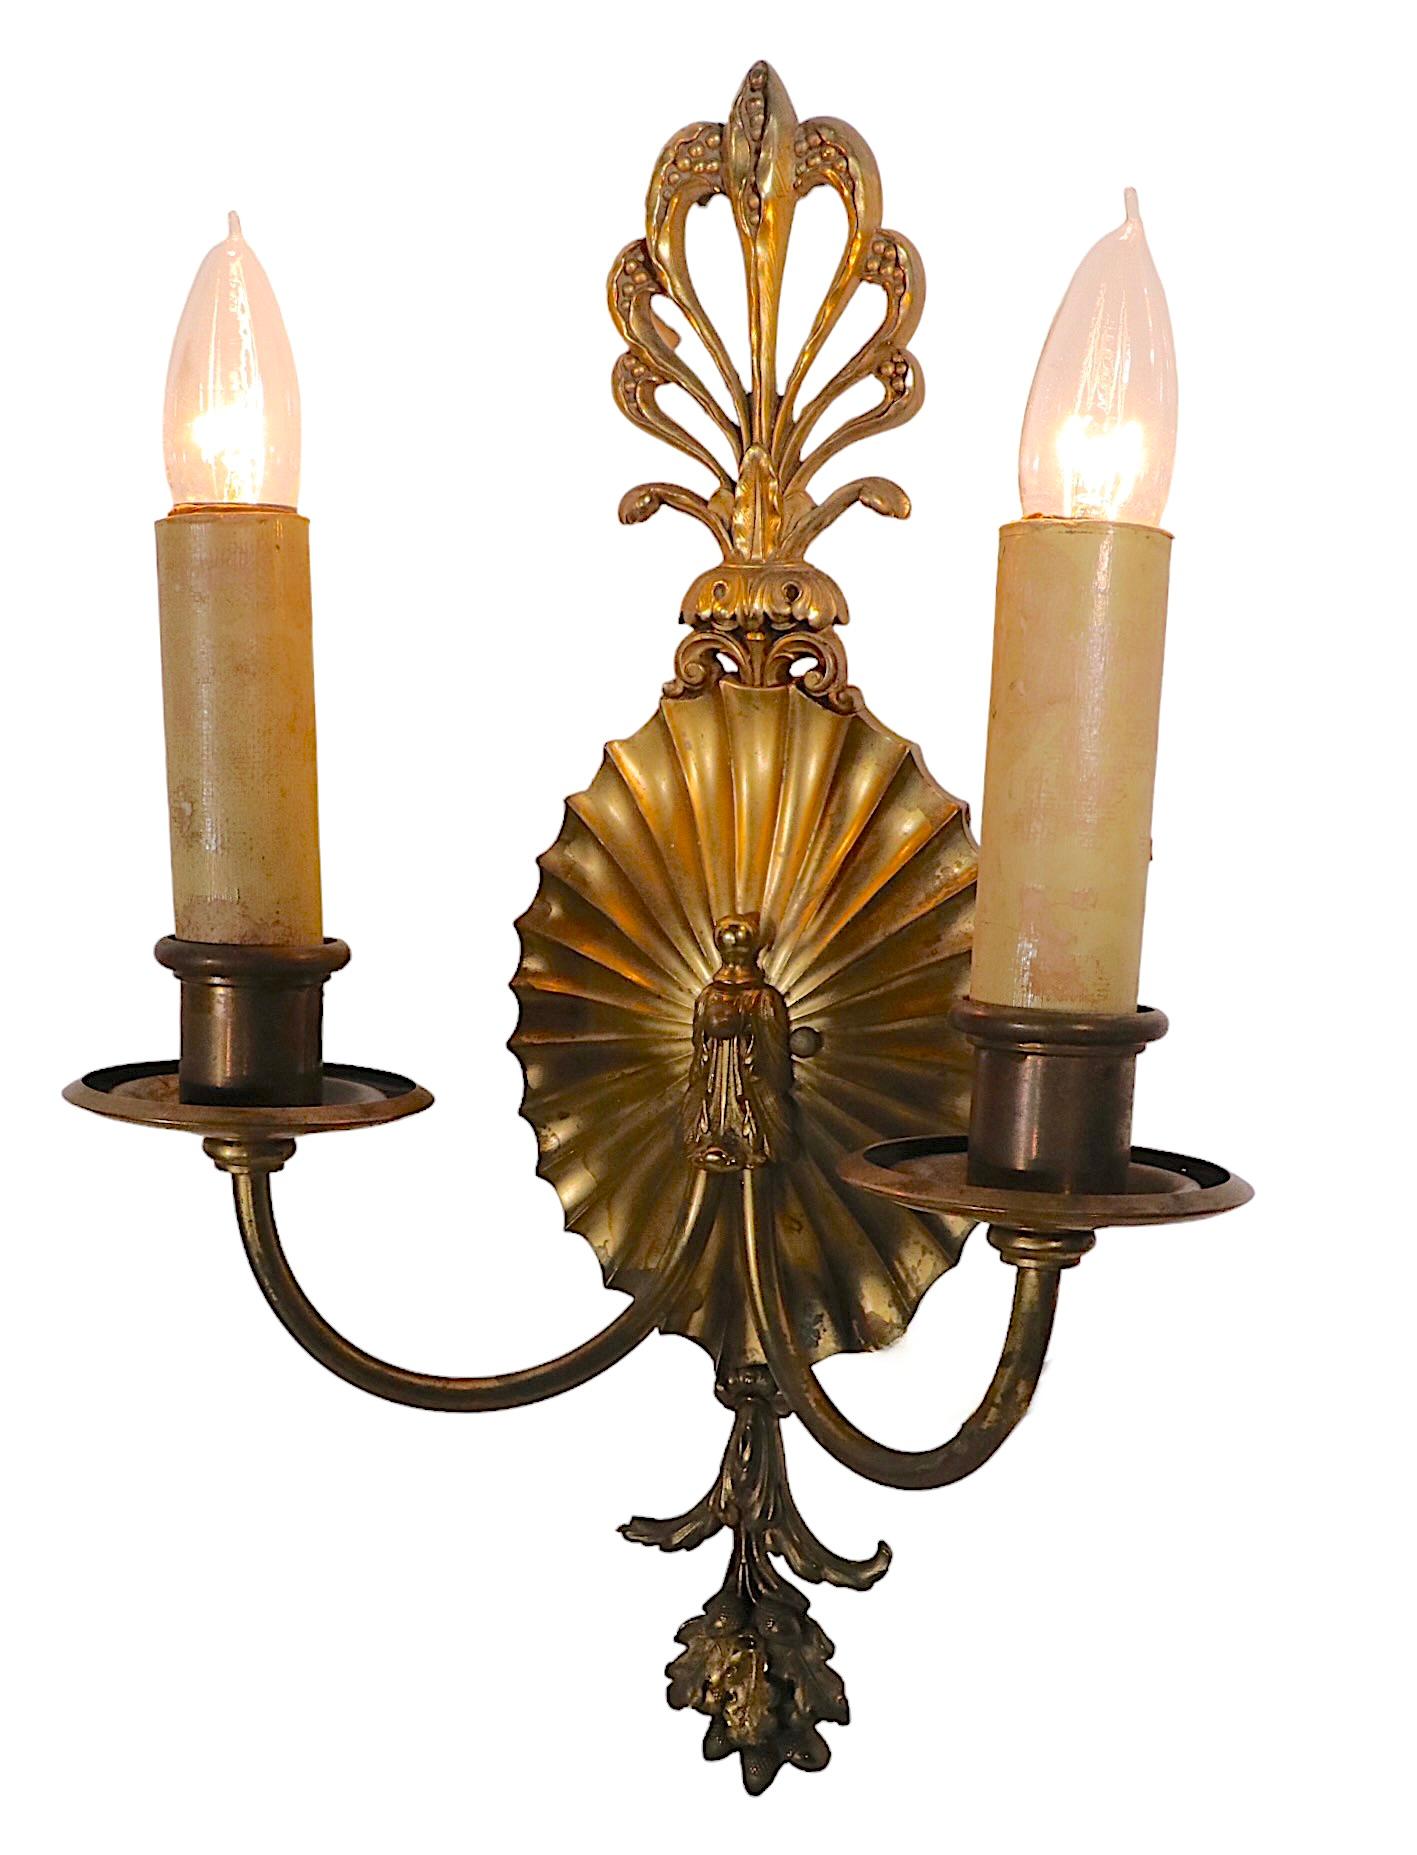 Impressive pair of formal, classic style wall sconces by Edward F. Caldwell. Each sconce has two candle style arms, and a cast brass backplate with decorative foliate castings. Both are in very good original, working, condition showing only light